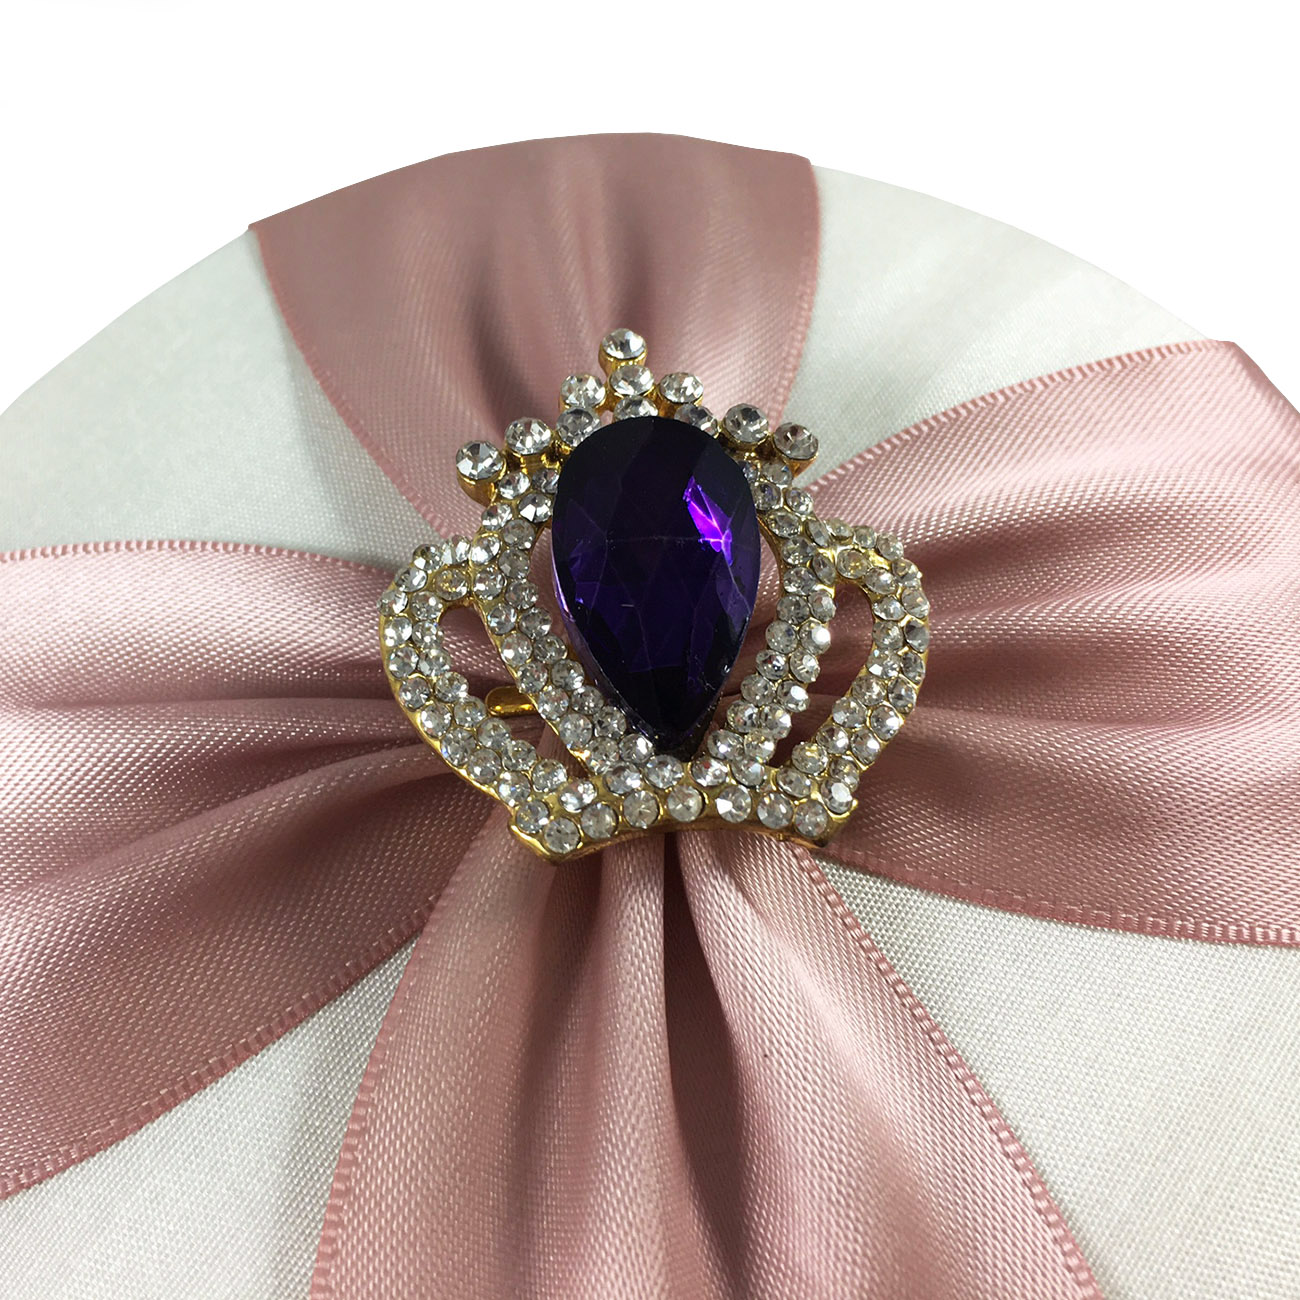 Luxury wedding gift box with crown brooch